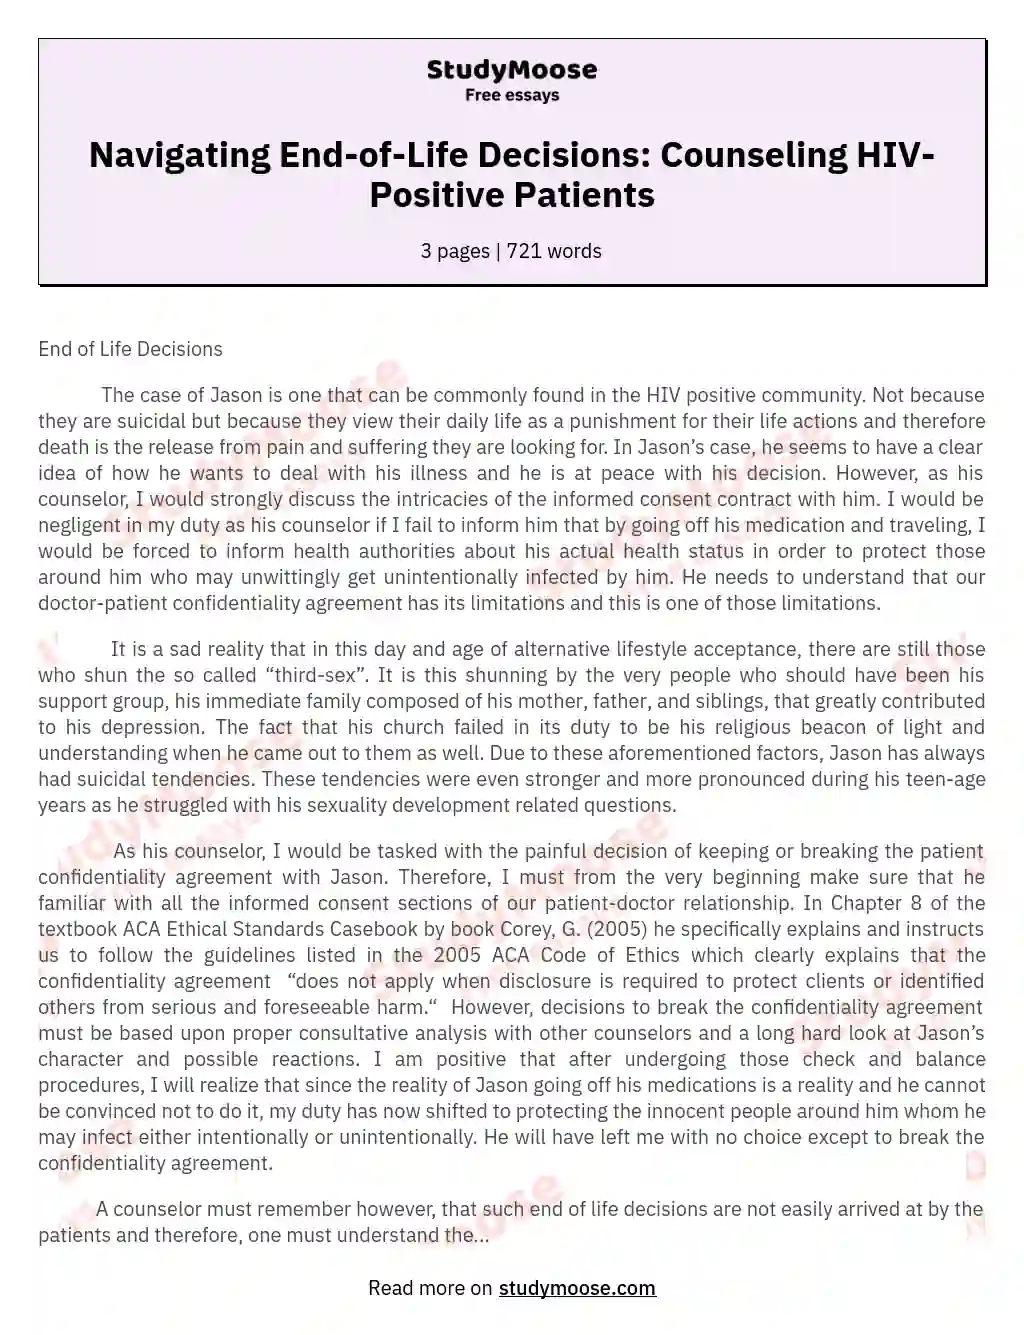 Navigating End-of-Life Decisions: Counseling HIV-Positive Patients essay